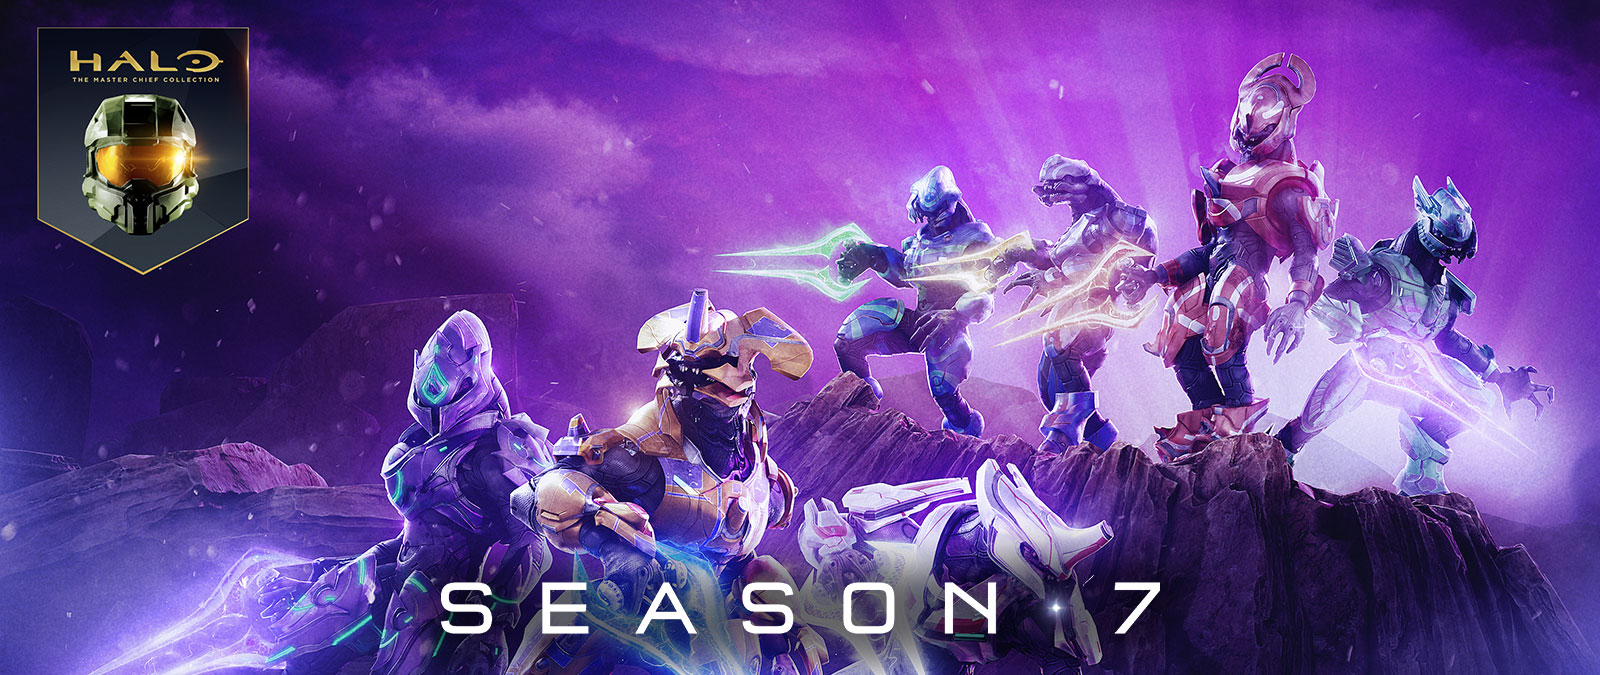 Halo: The Master Chief Collection, Season 7, Multiple Elites pose wearing different armor and holding differently colored Energy Swords